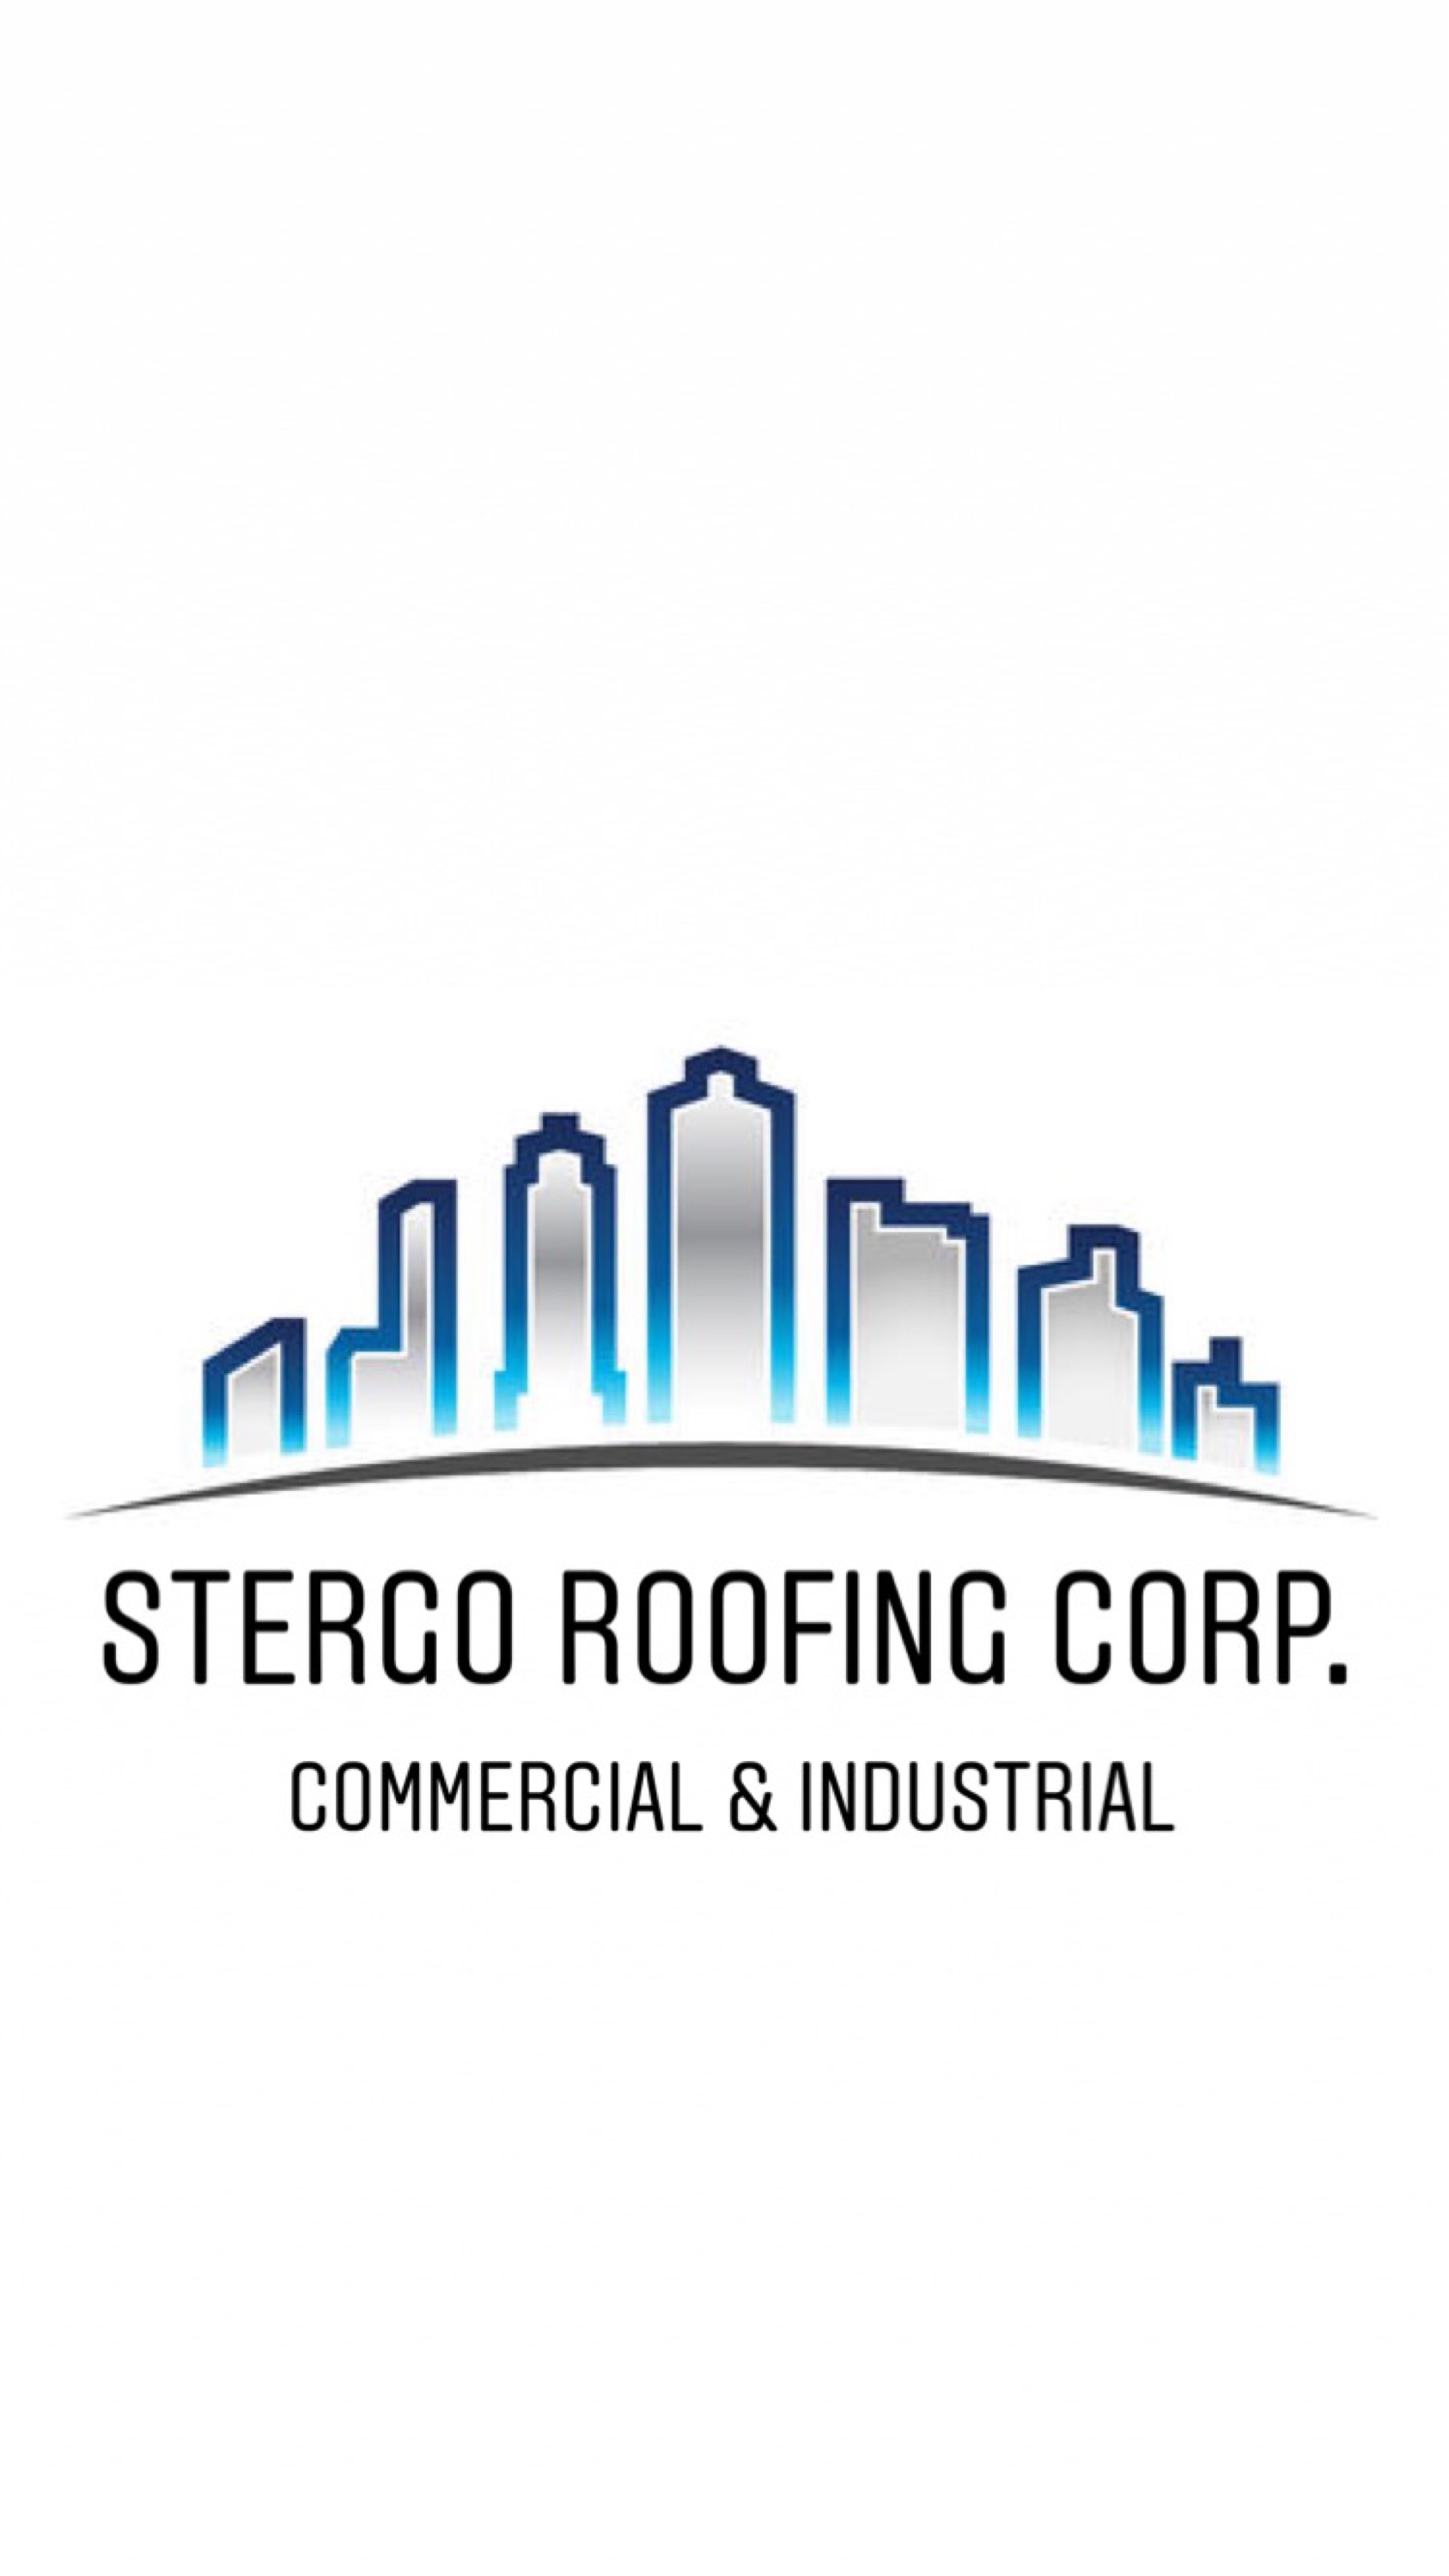 Stergo Roofing Corporation Logo